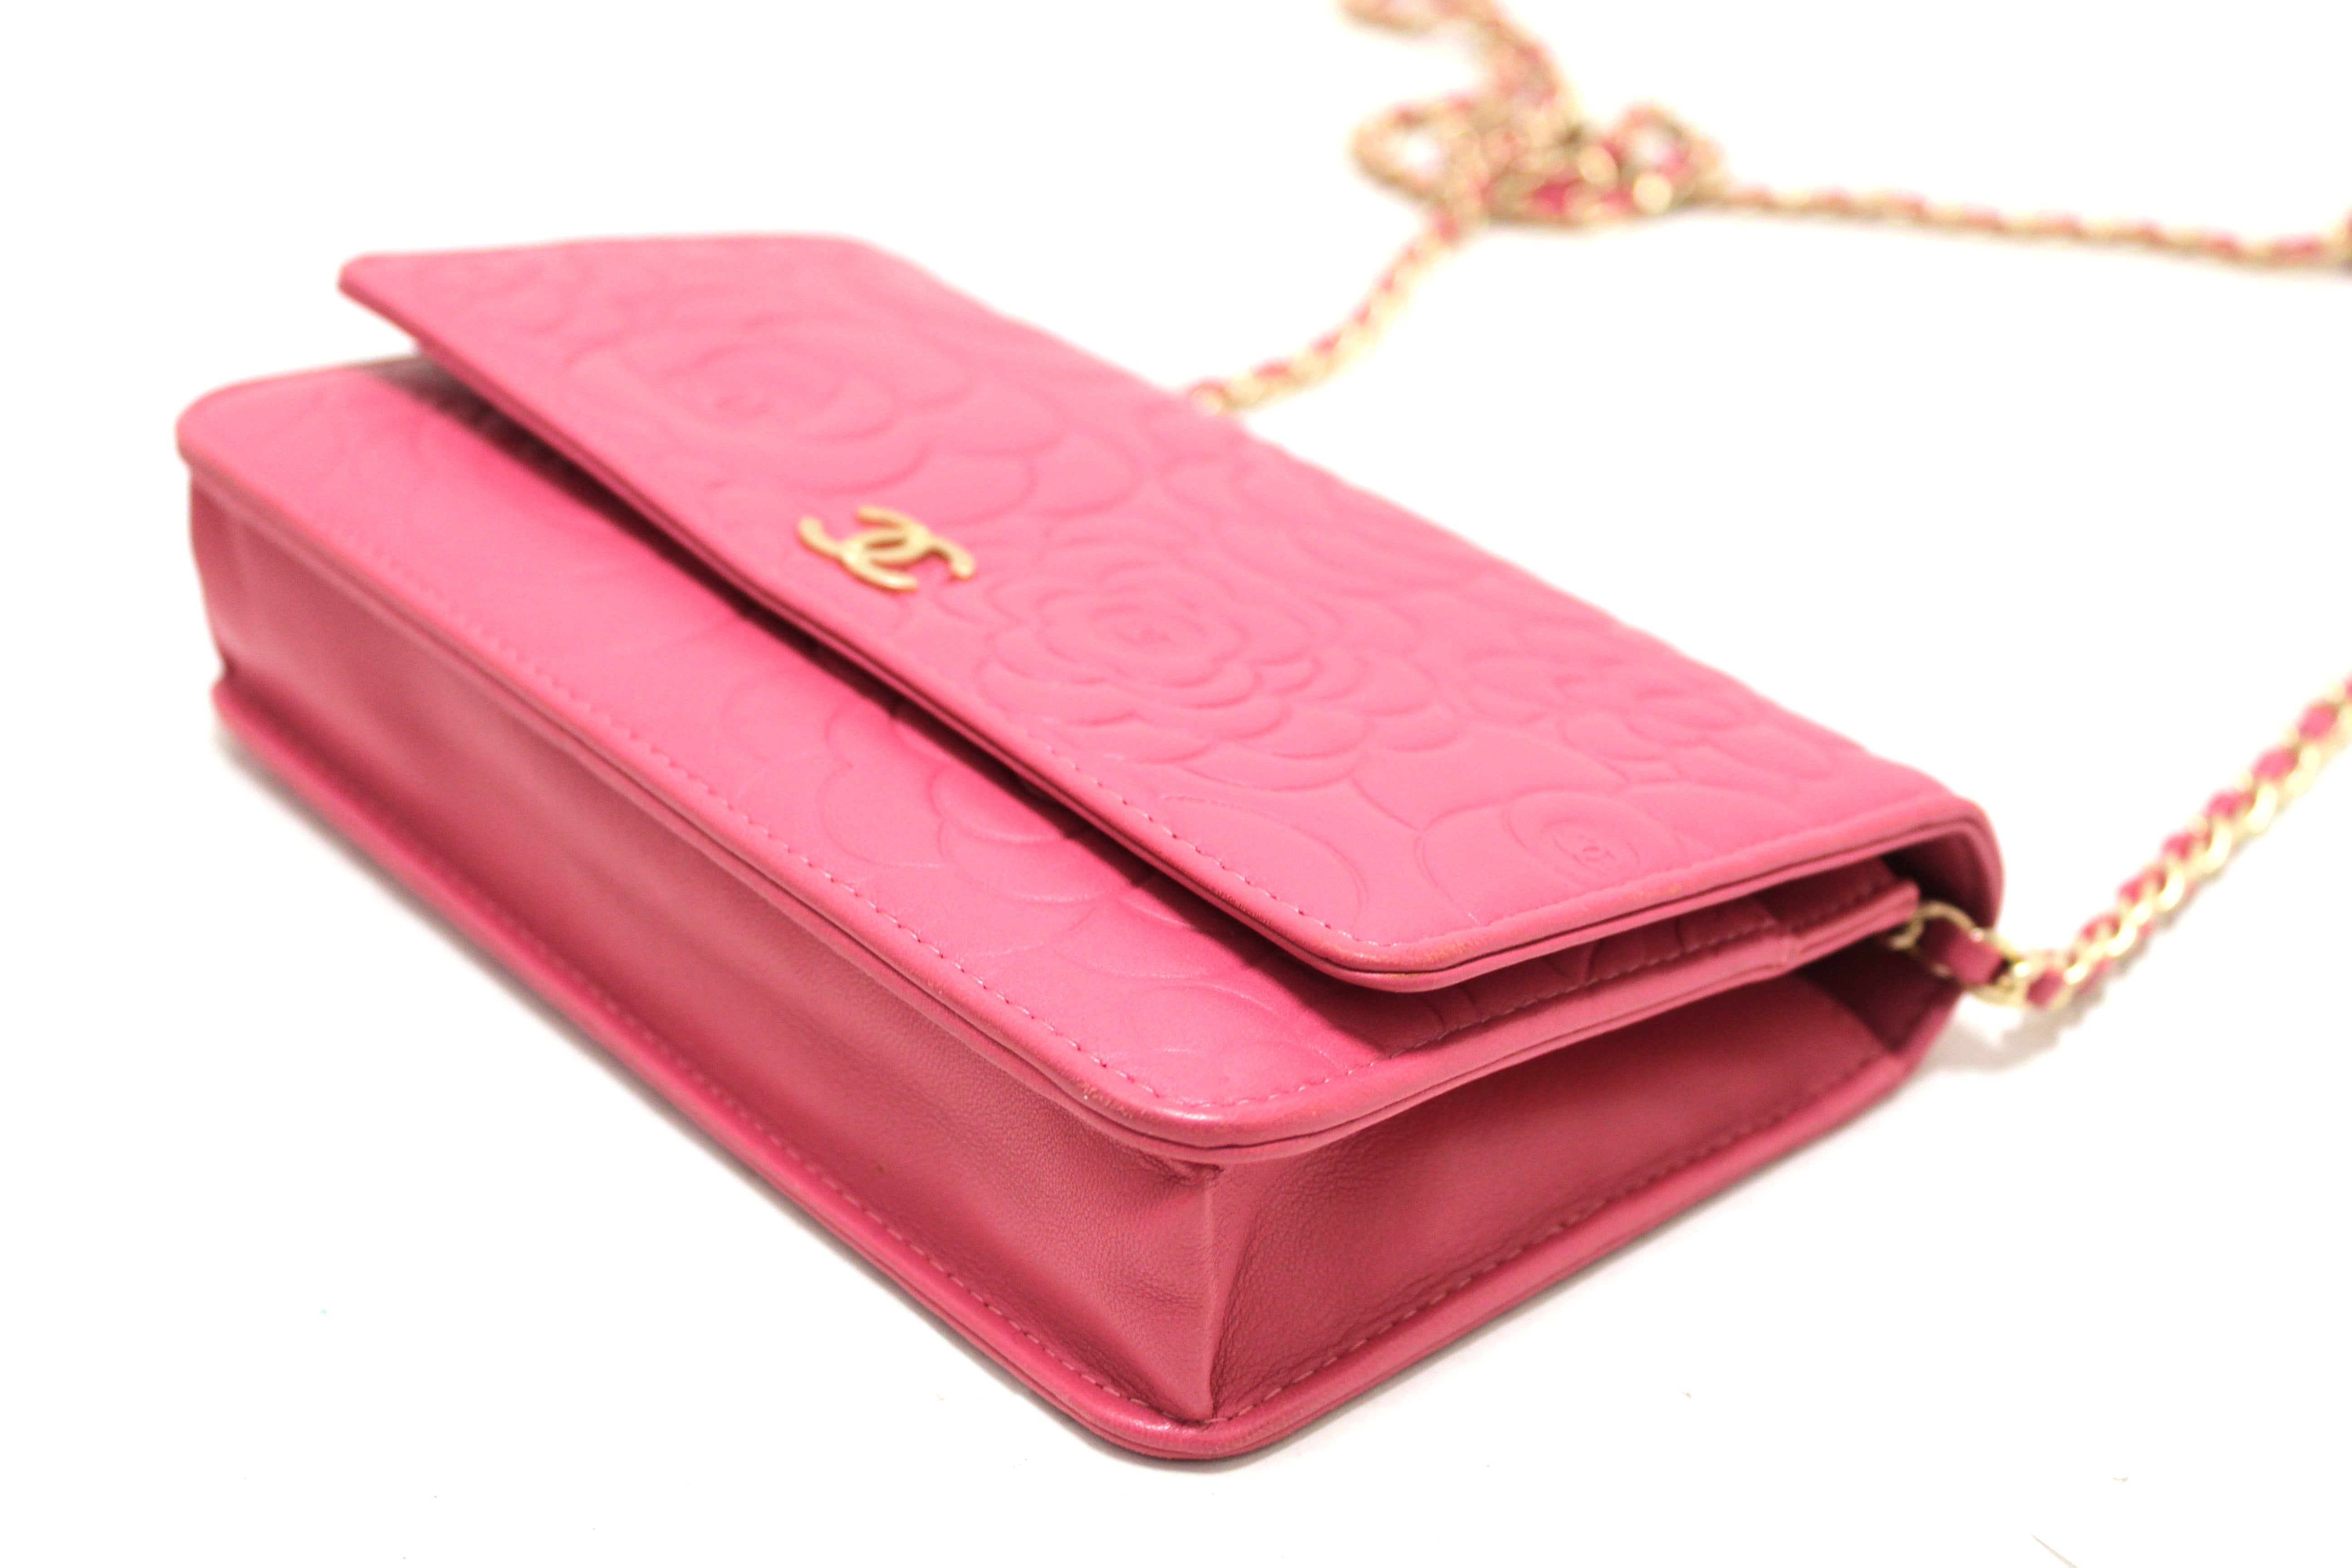 Brand New Valentino Wallet On Chain WOC Clutch In Nude Pink Ready With Strap